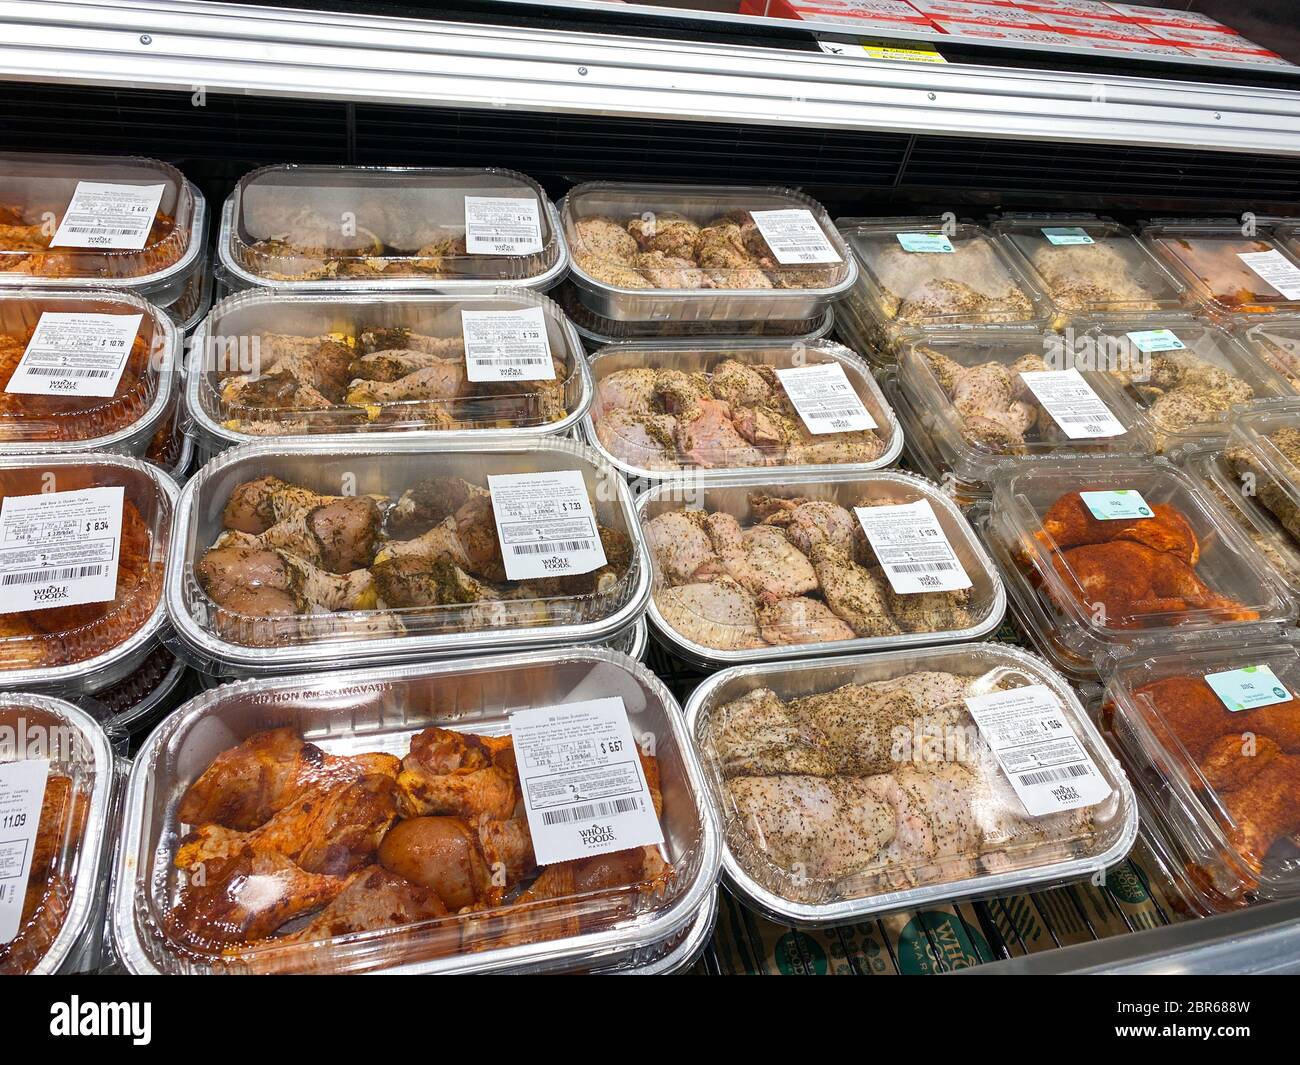 https://c8.alamy.com/comp/2BR688W/orlando-flusa-5320-a-display-of-ready-to-bake-chicken-dinners-at-a-whole-foods-market-grocery-store-waiting-for-customers-to-purchase-2BR688W.jpg